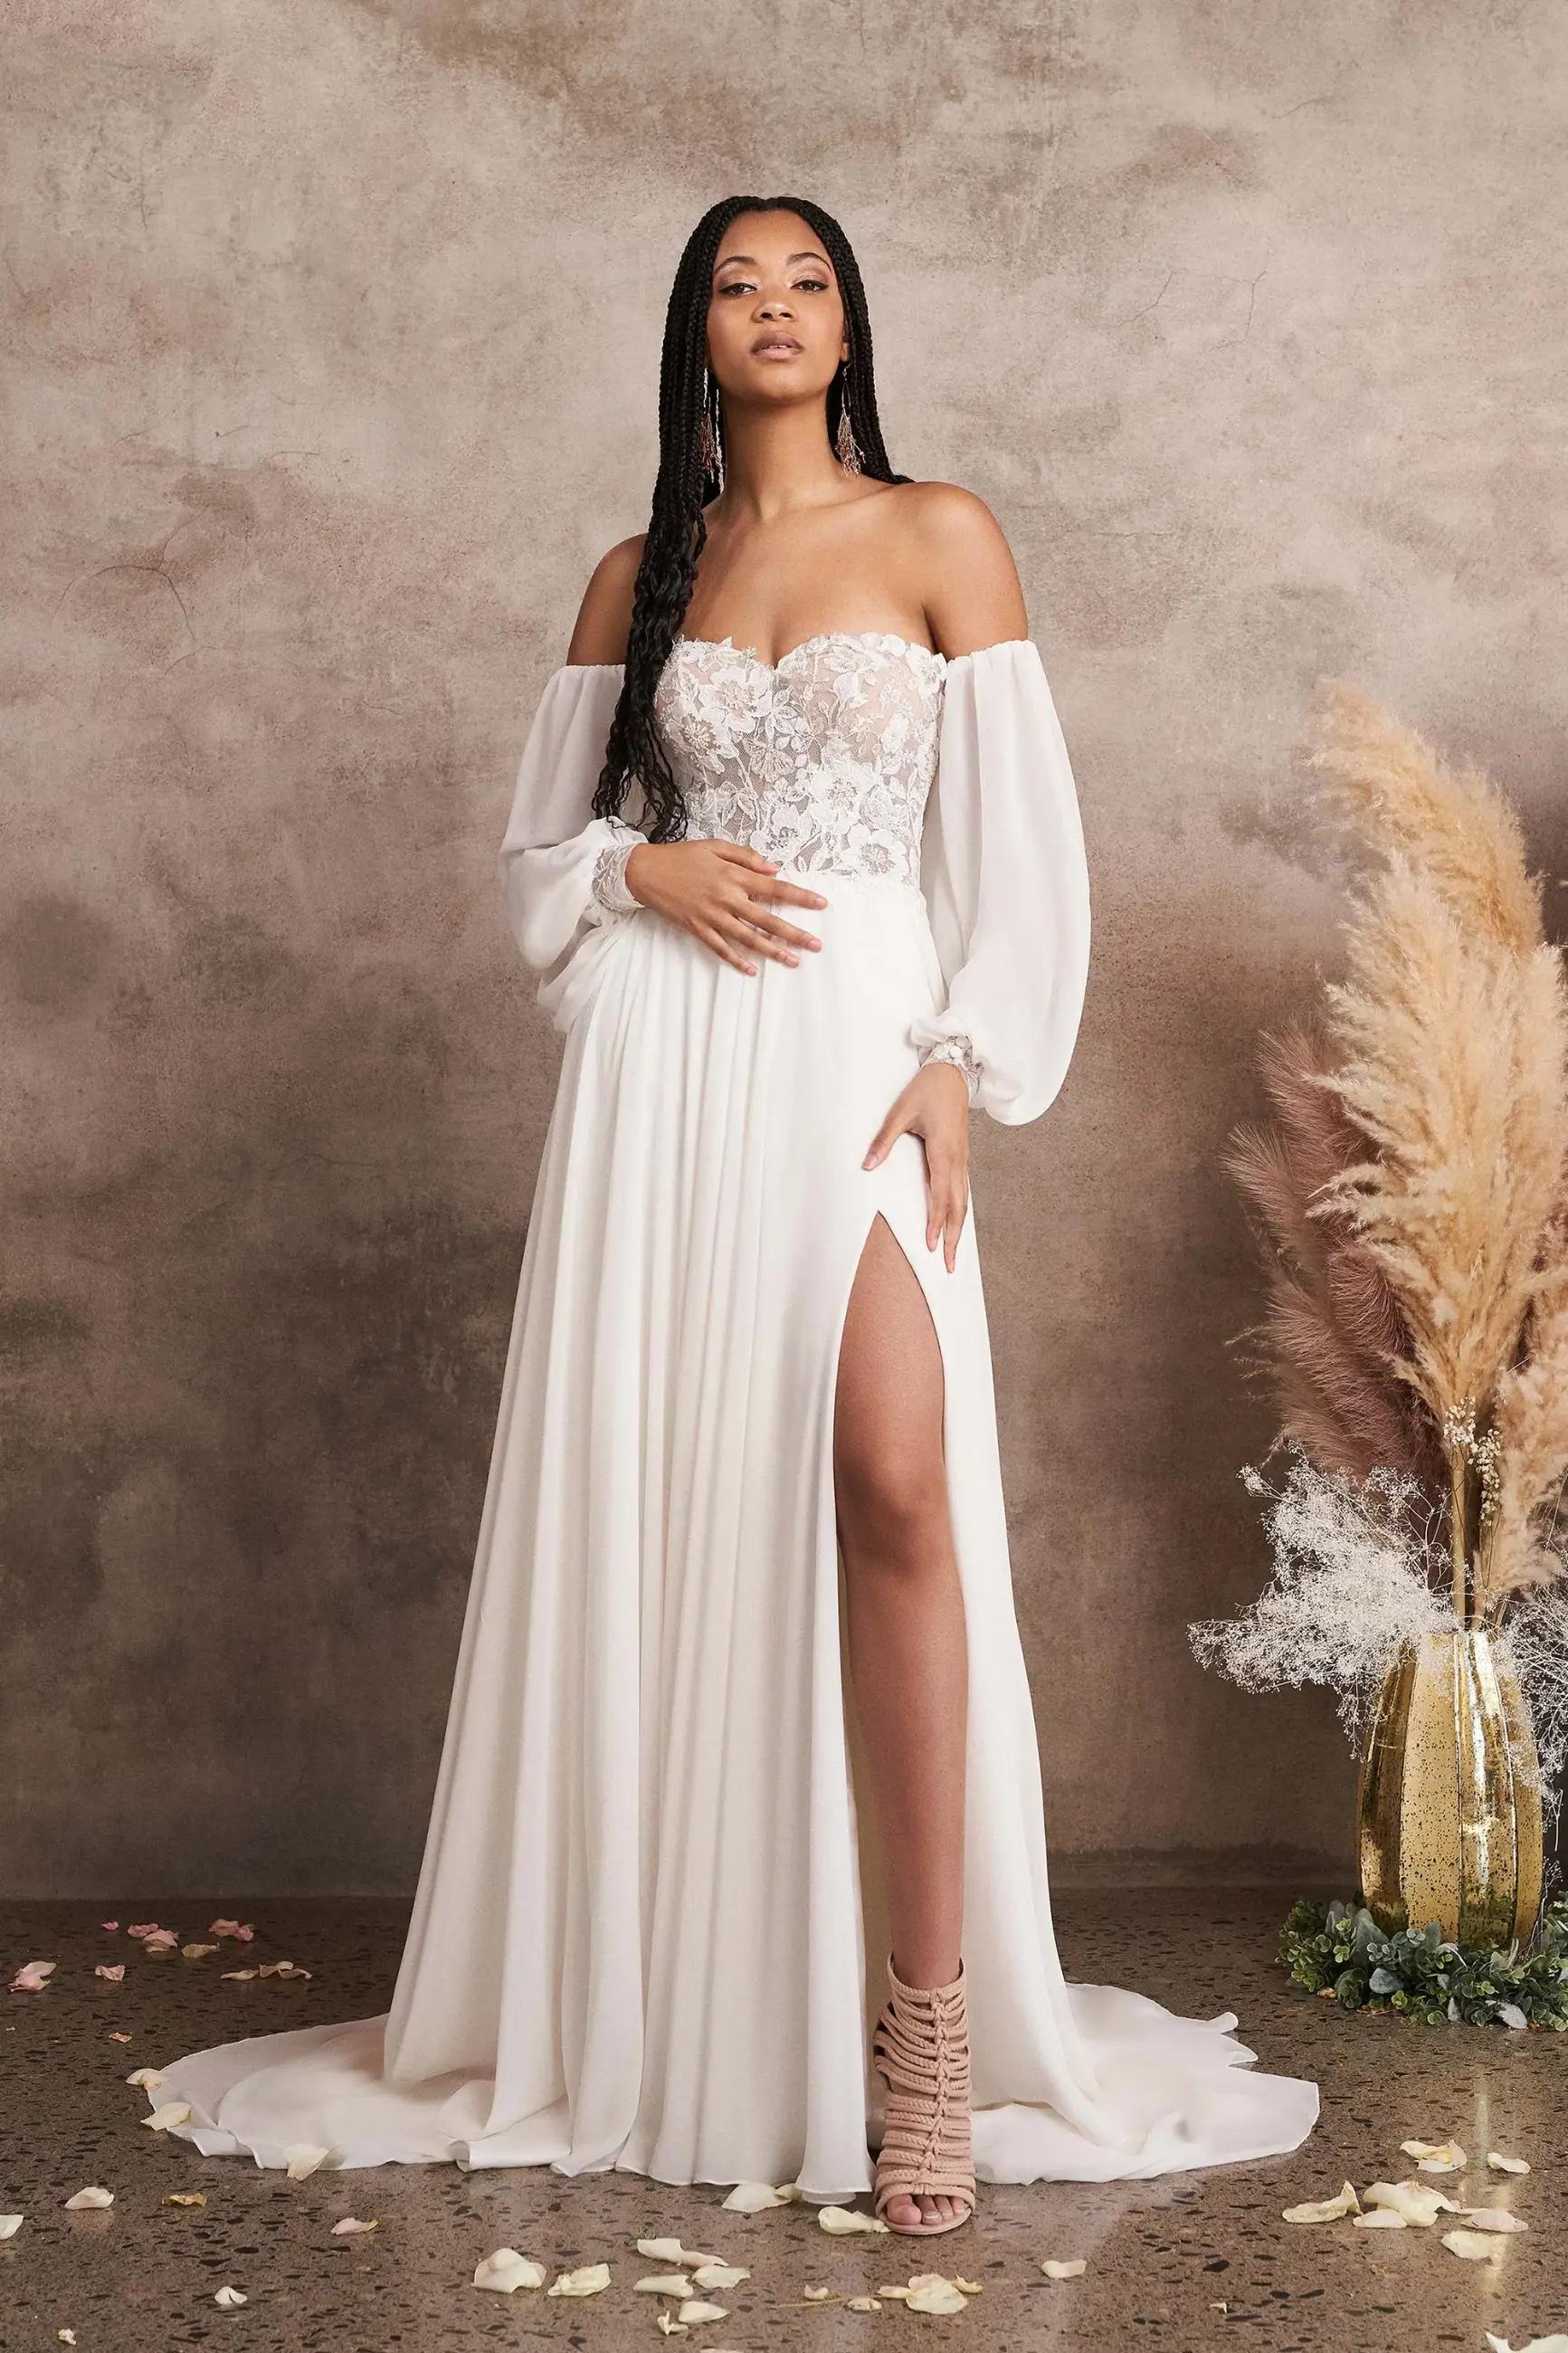 Exploring the Boho Aesthetic with Lillian West Bridal Gowns Image